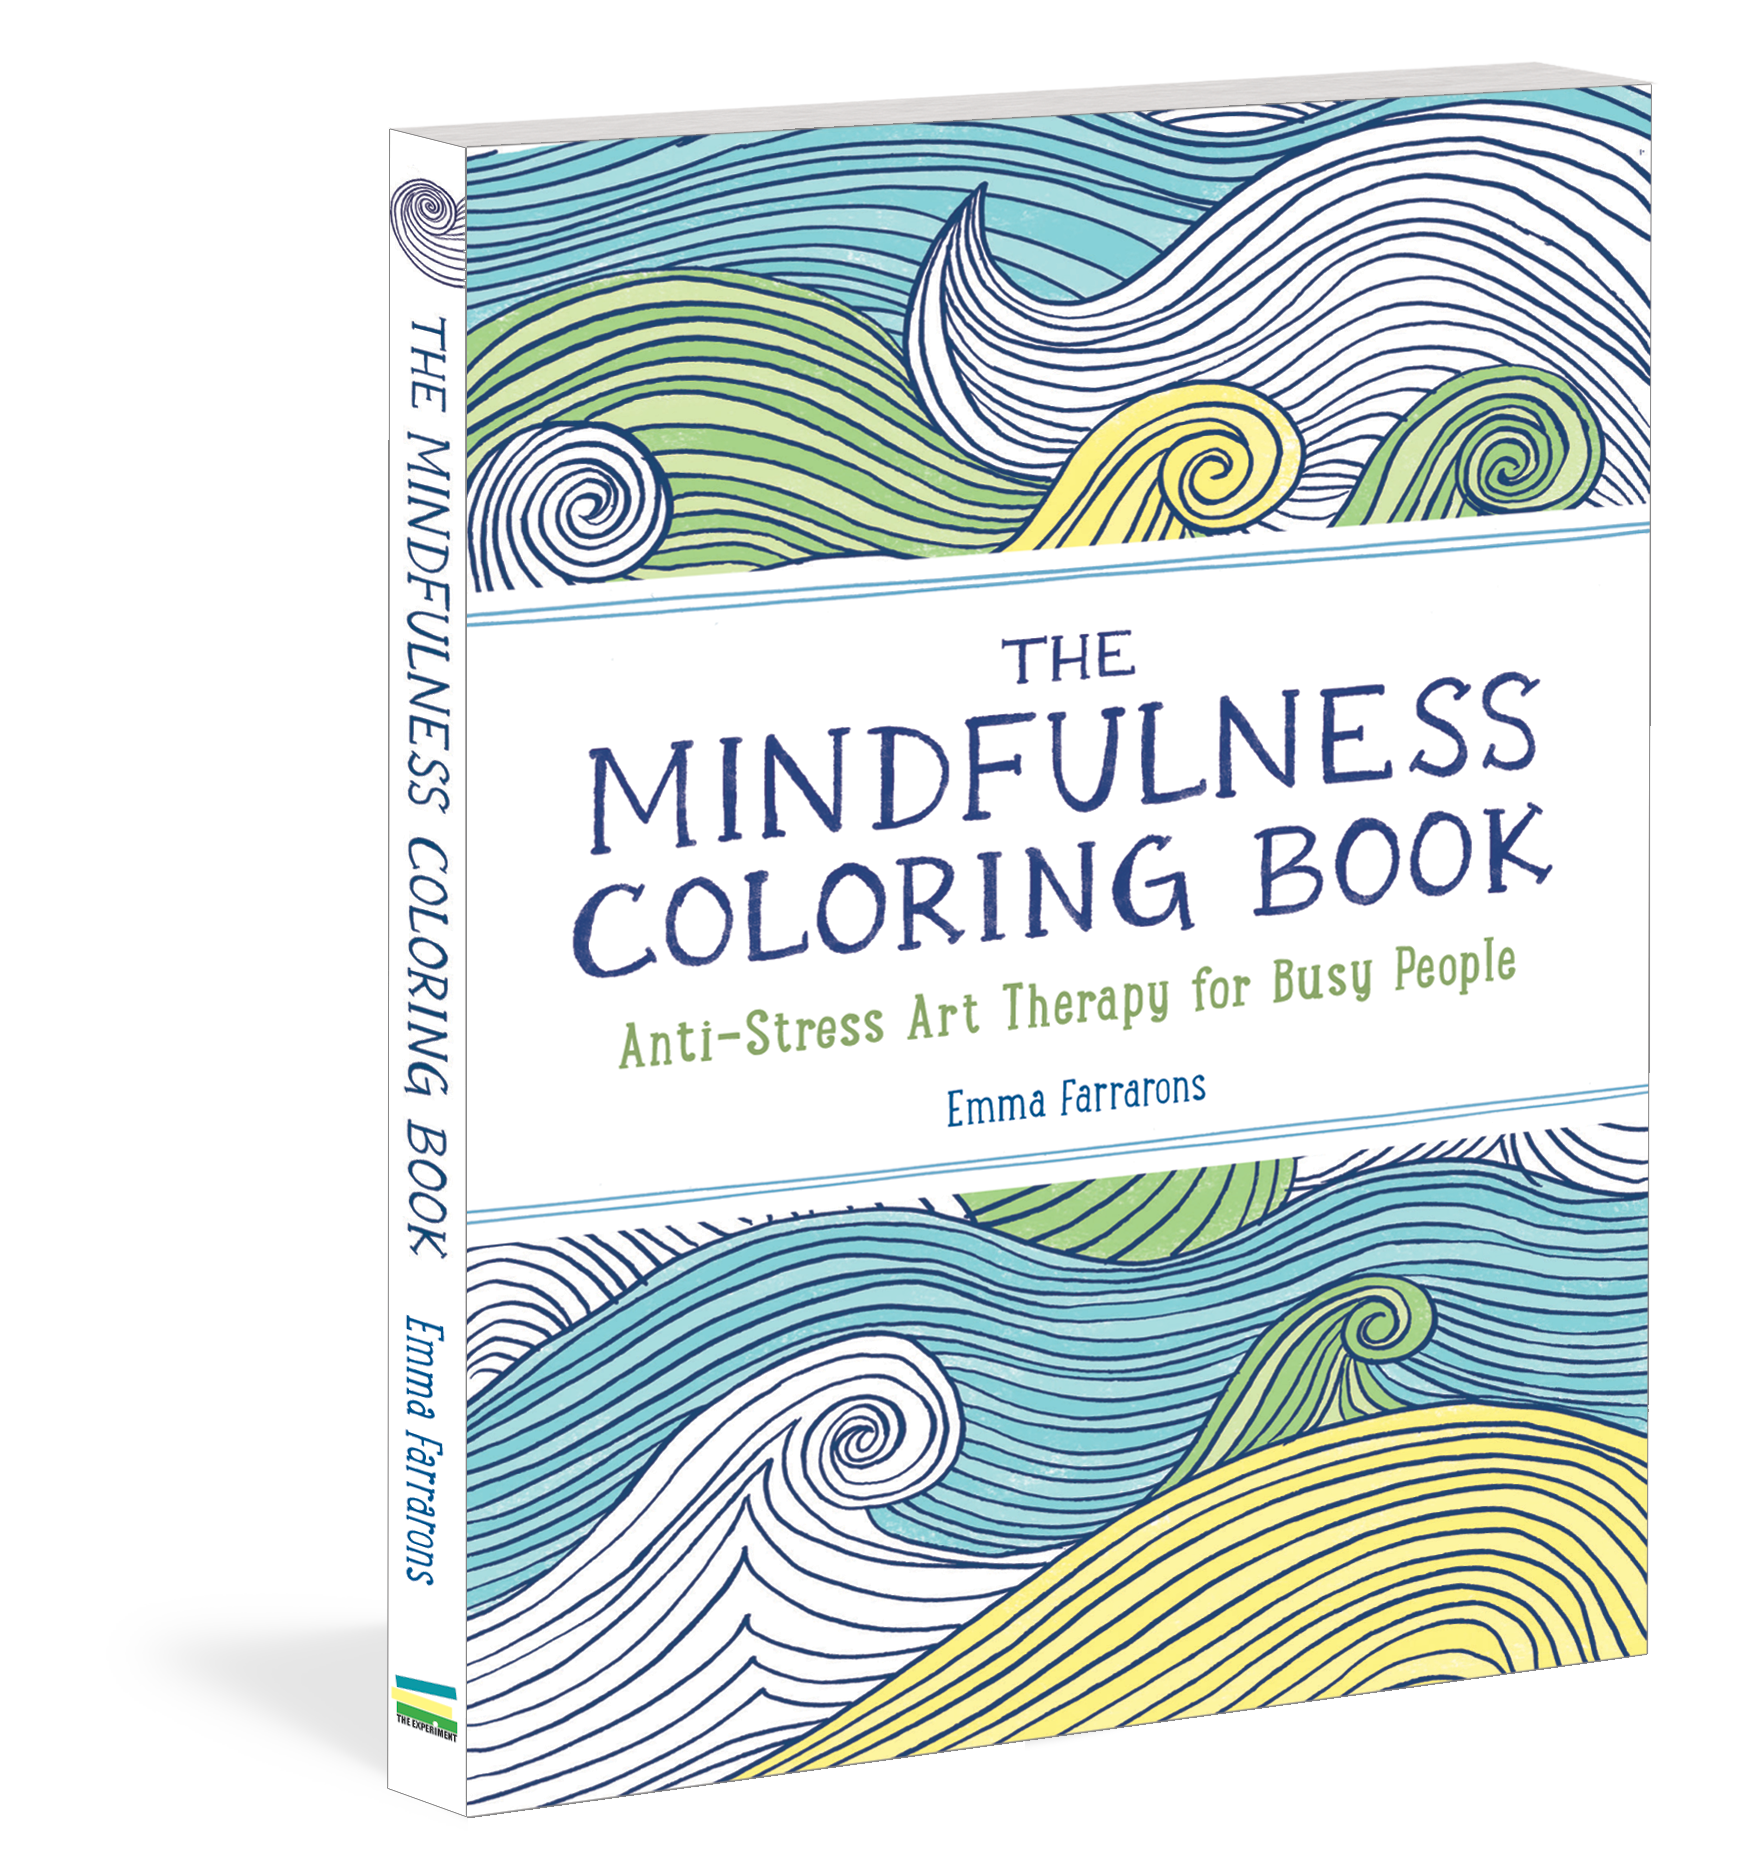 Moments of Mindfulness: The Anti-Stress Adult Coloring Book with Activities  to Feel Calmer (Paperback)